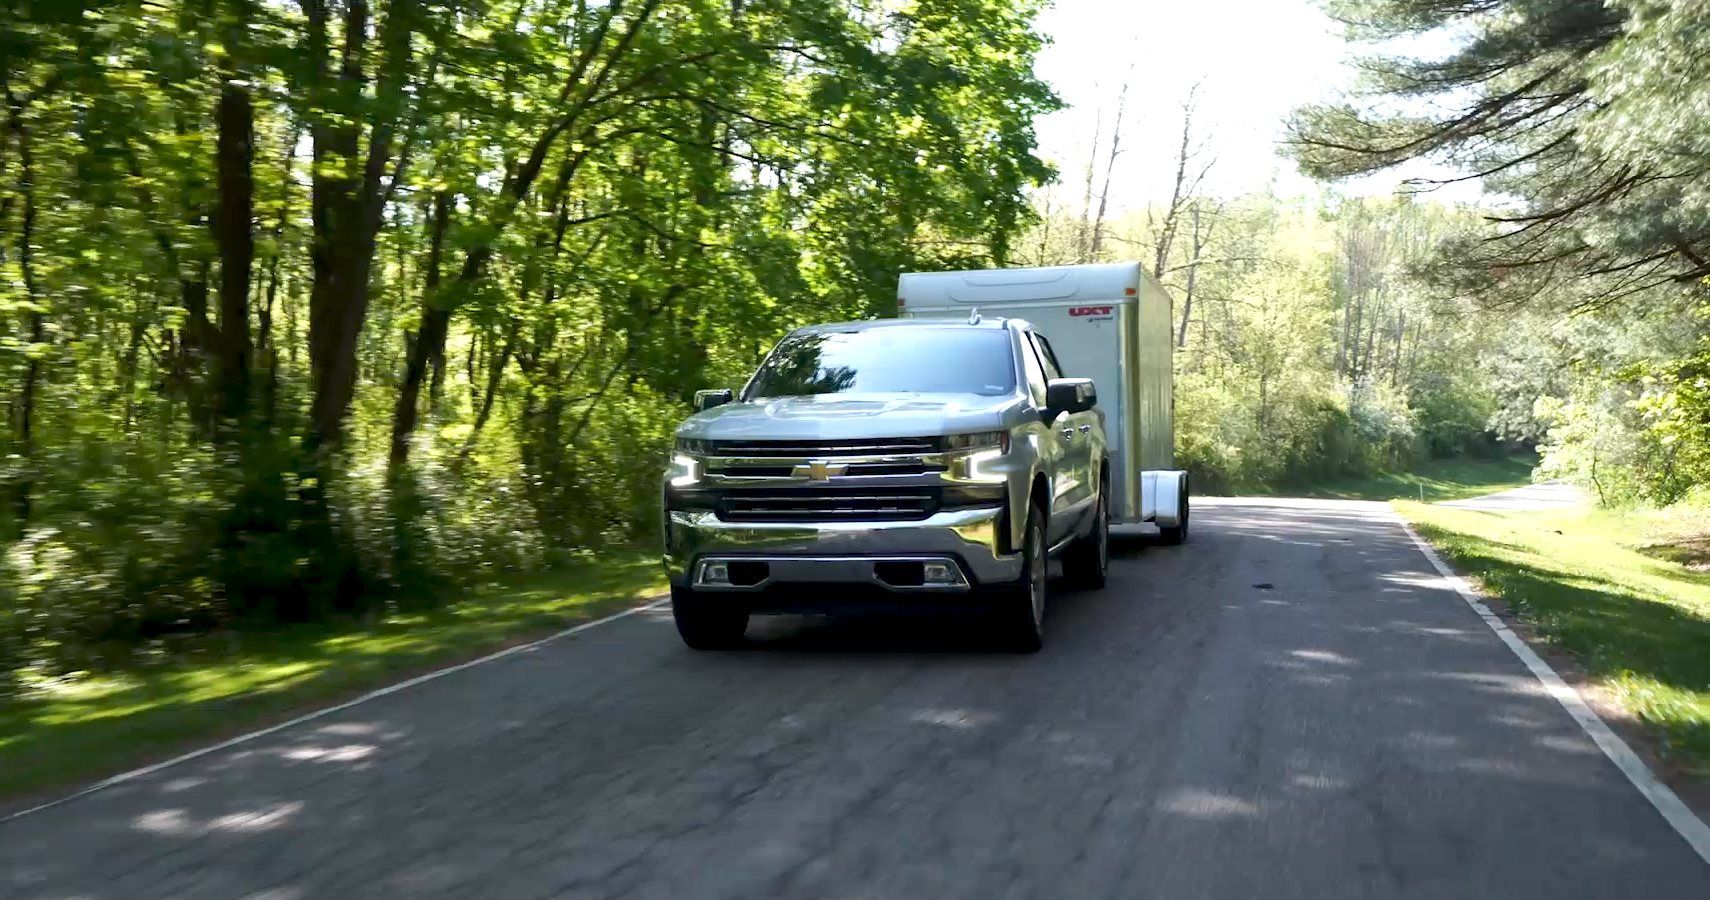 2019 Chevrolet Silverado To Give Drivers Multiple Towing-Aid Levels